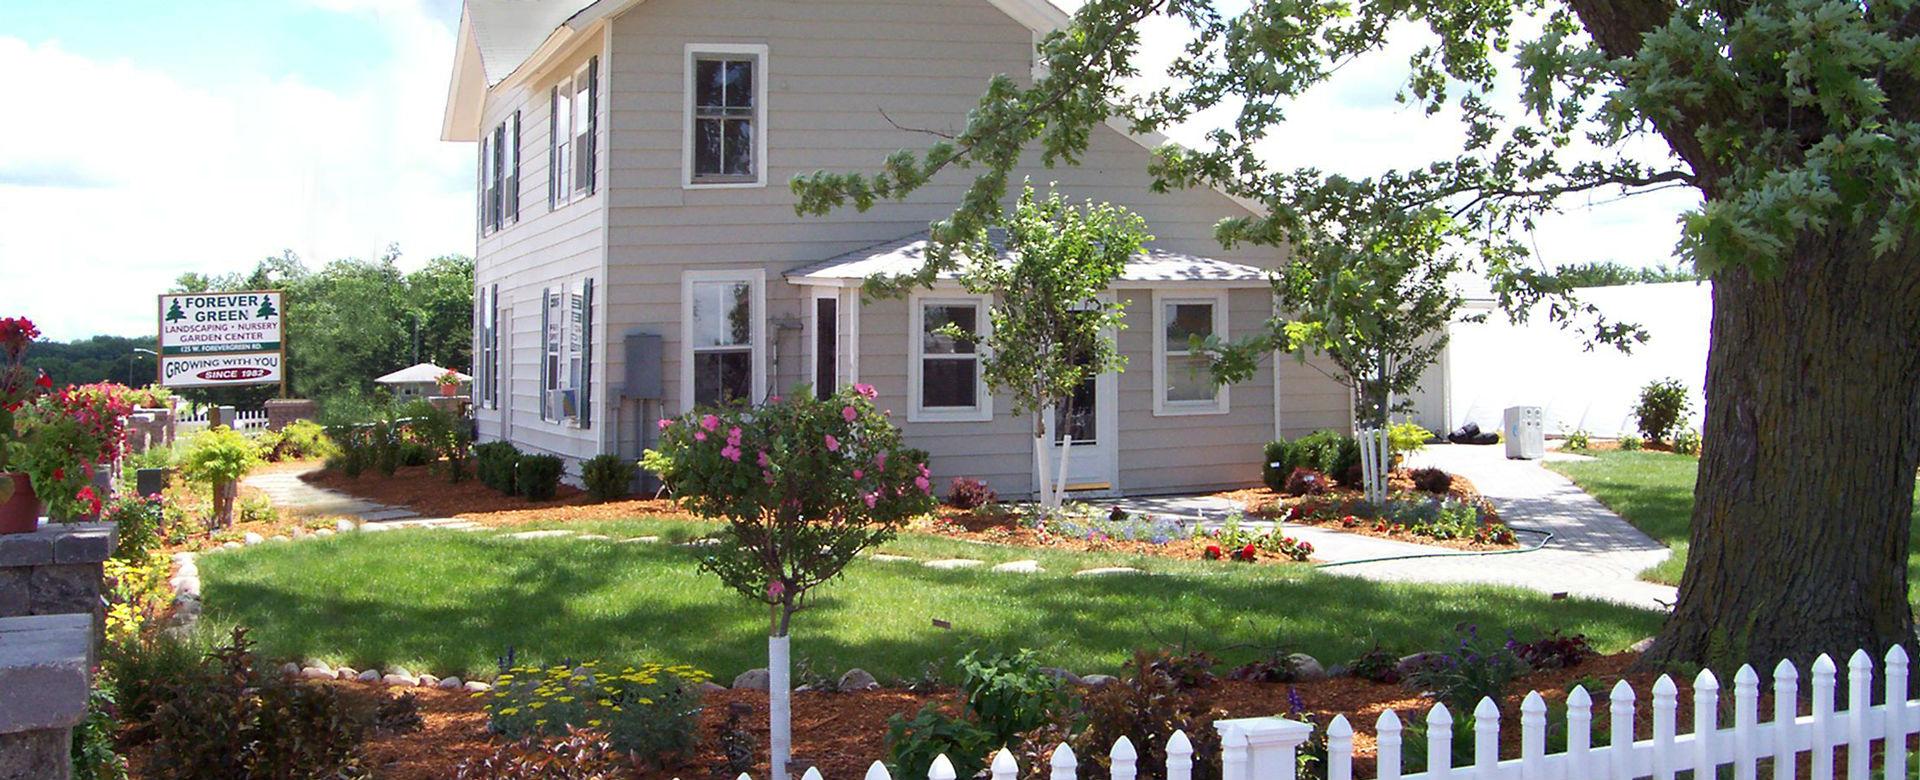 Forever Green Coralville Iowa Who We Are header landscaping house